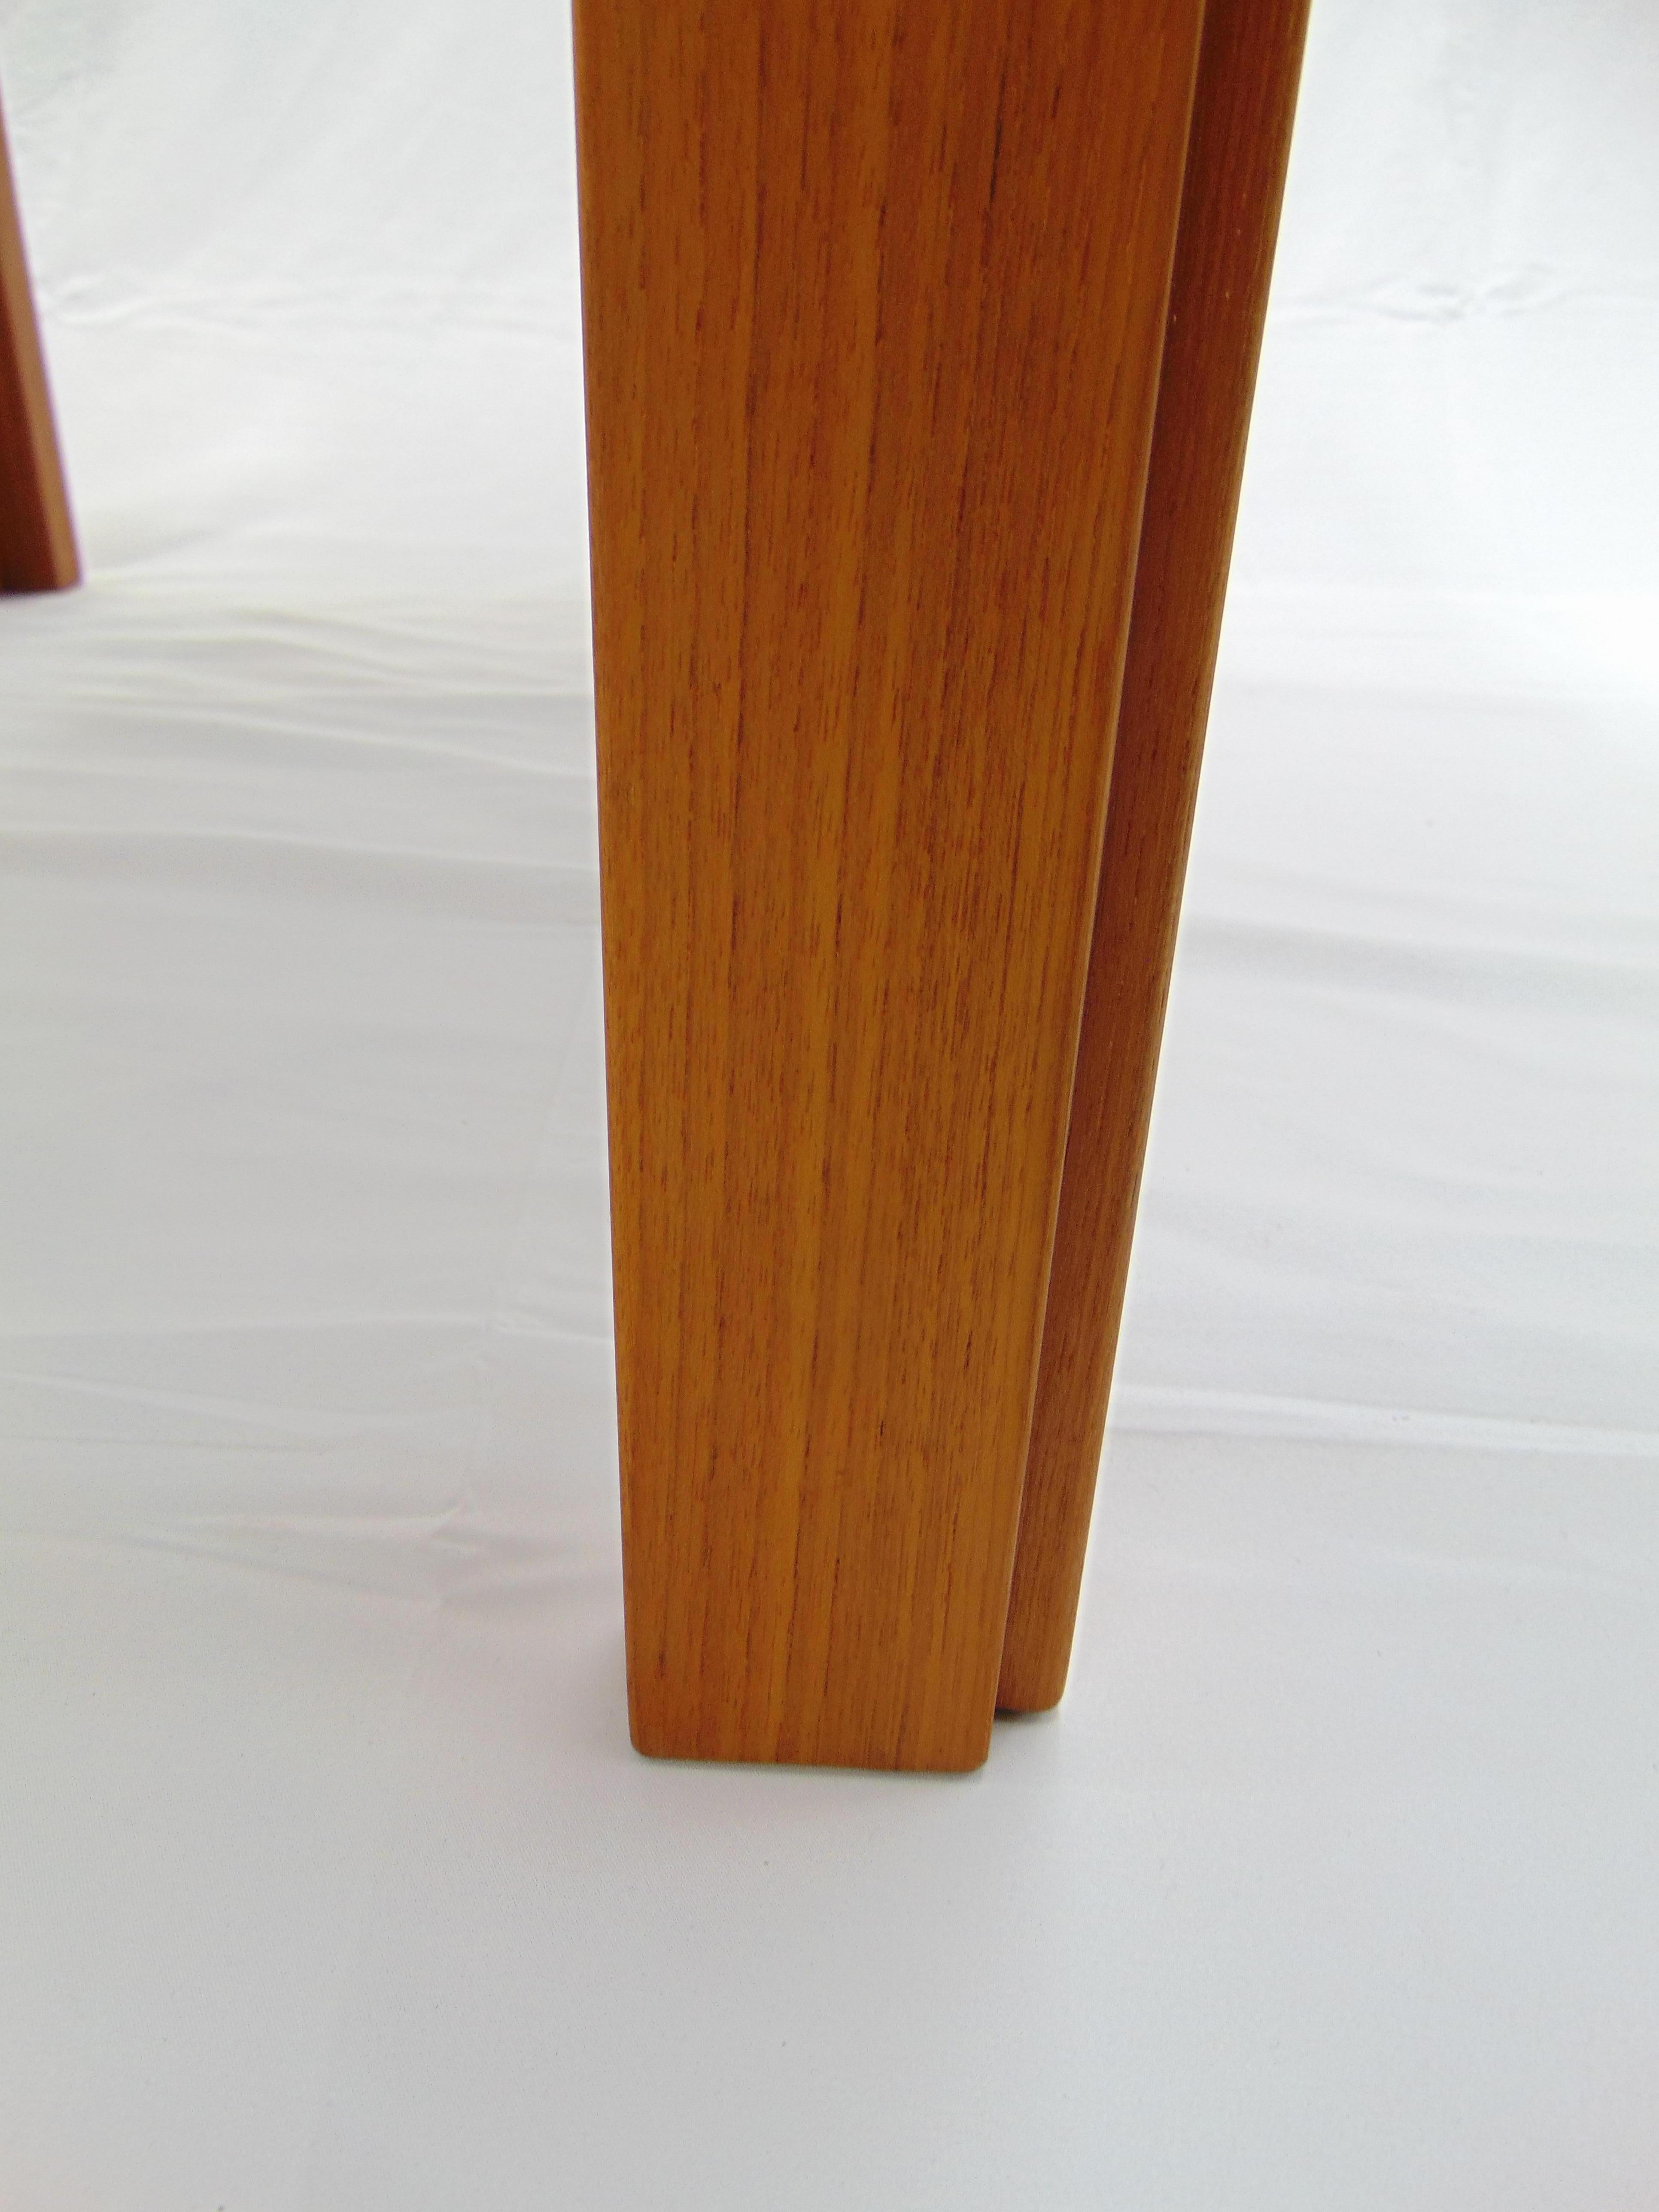 Tarm Stole Denmark Mid Century Teak Parquetry Wood Pair of Side Table For Sale 4